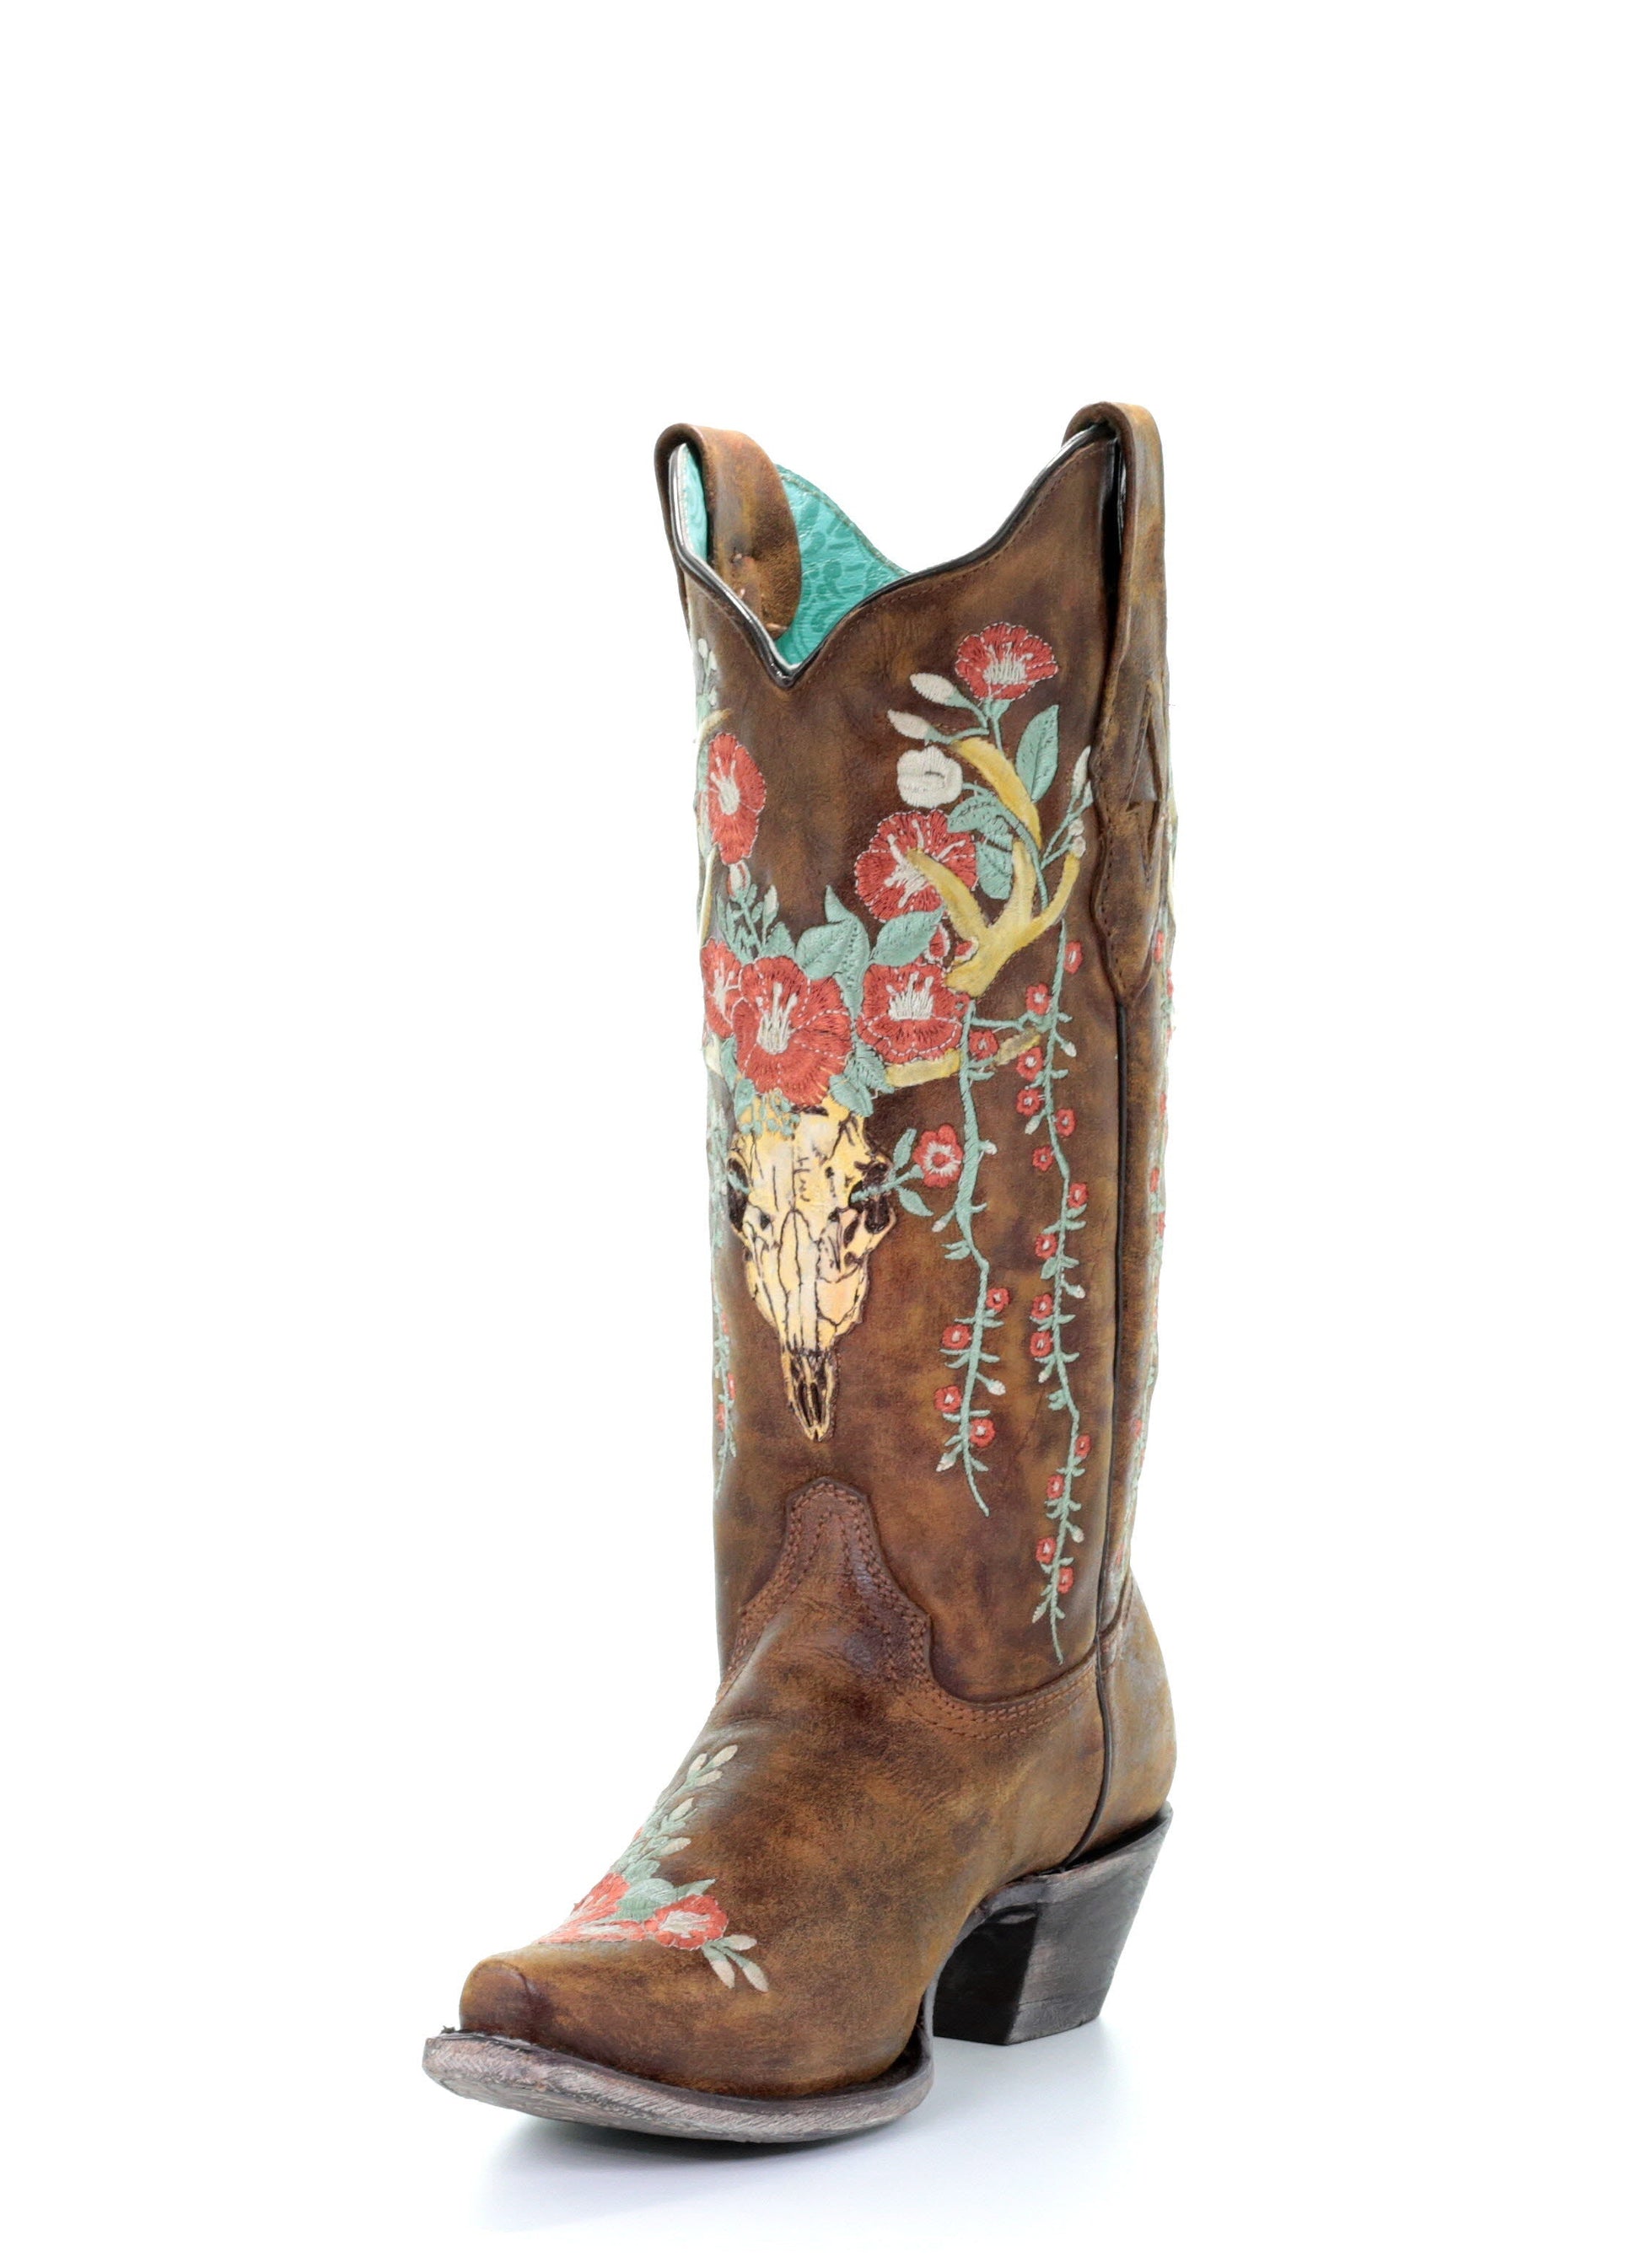 A3652 - Corral tan western cowgirl leather boots for women-Kuet.us